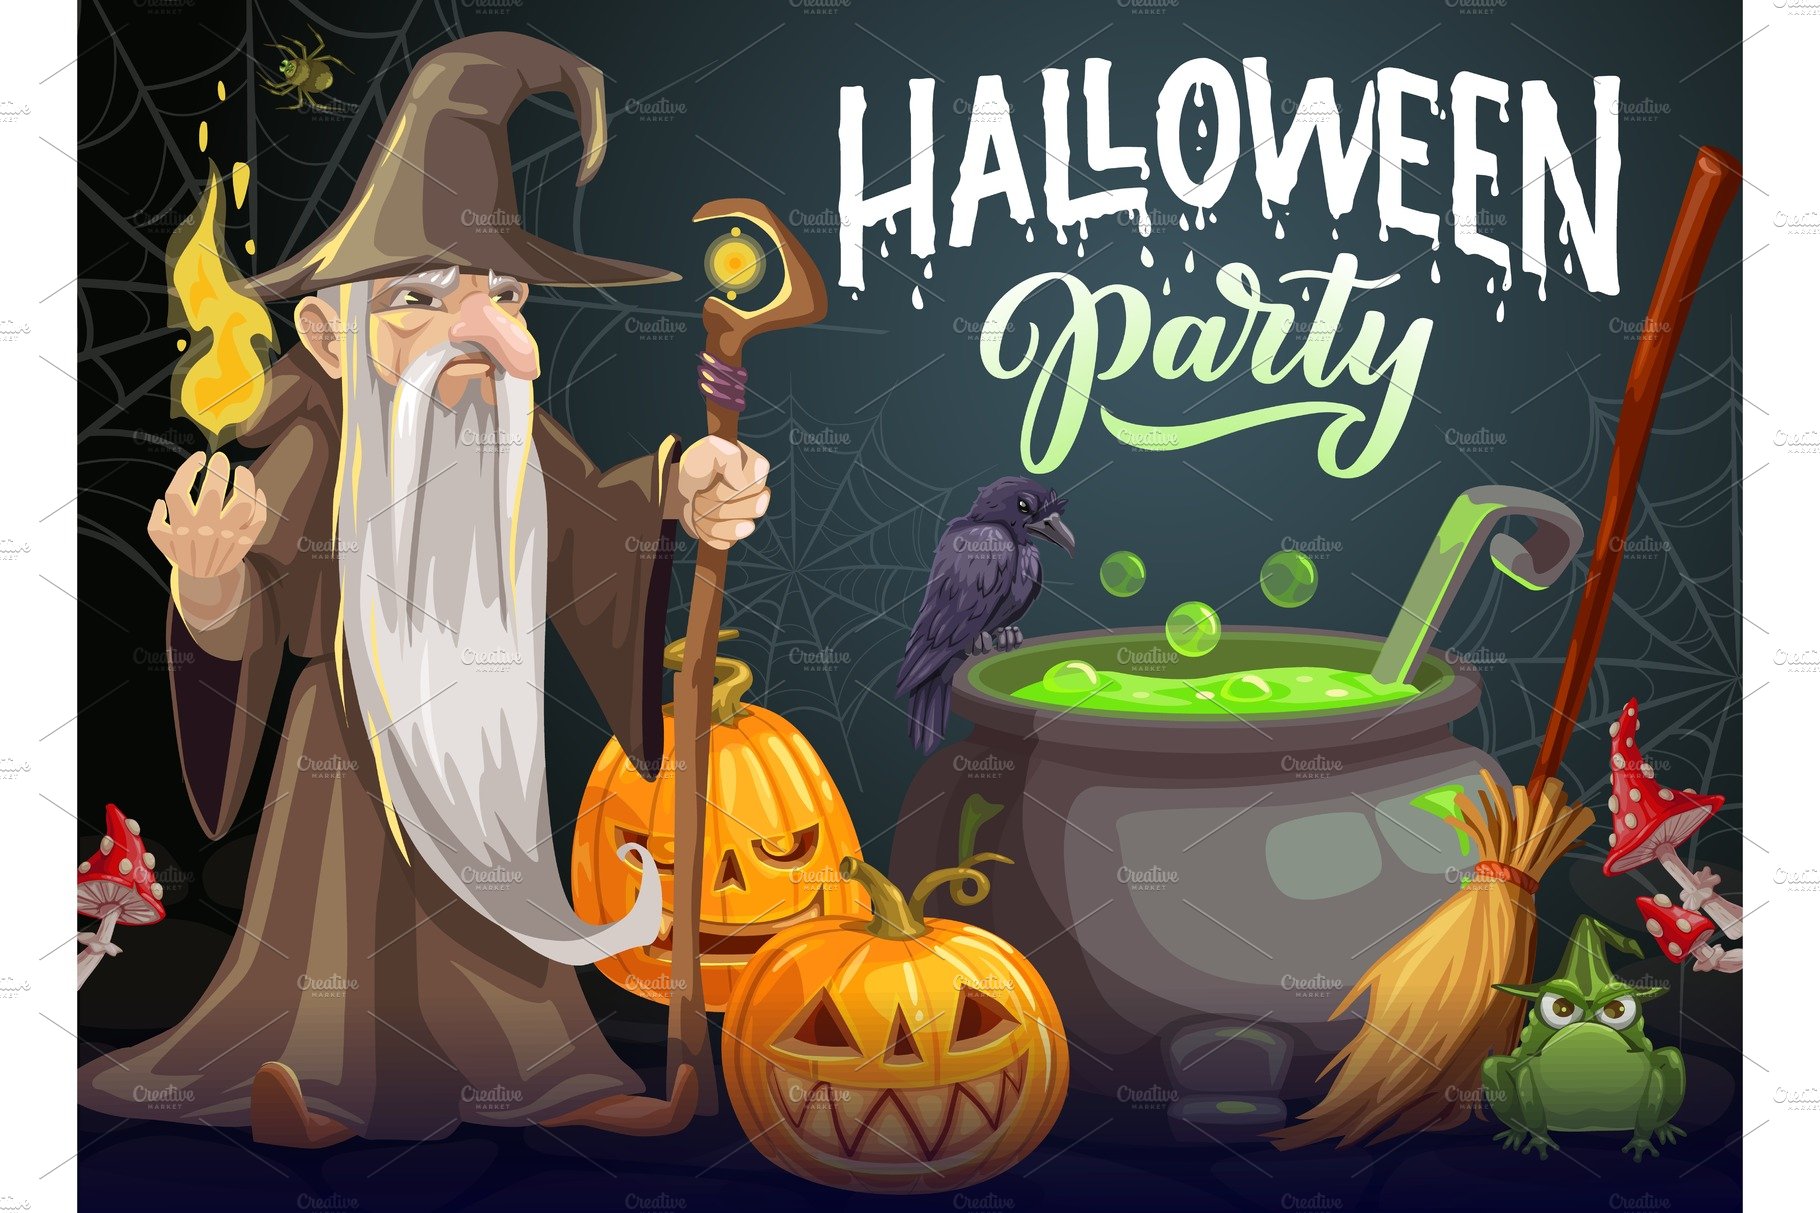 Halloween party, wizard cover image.